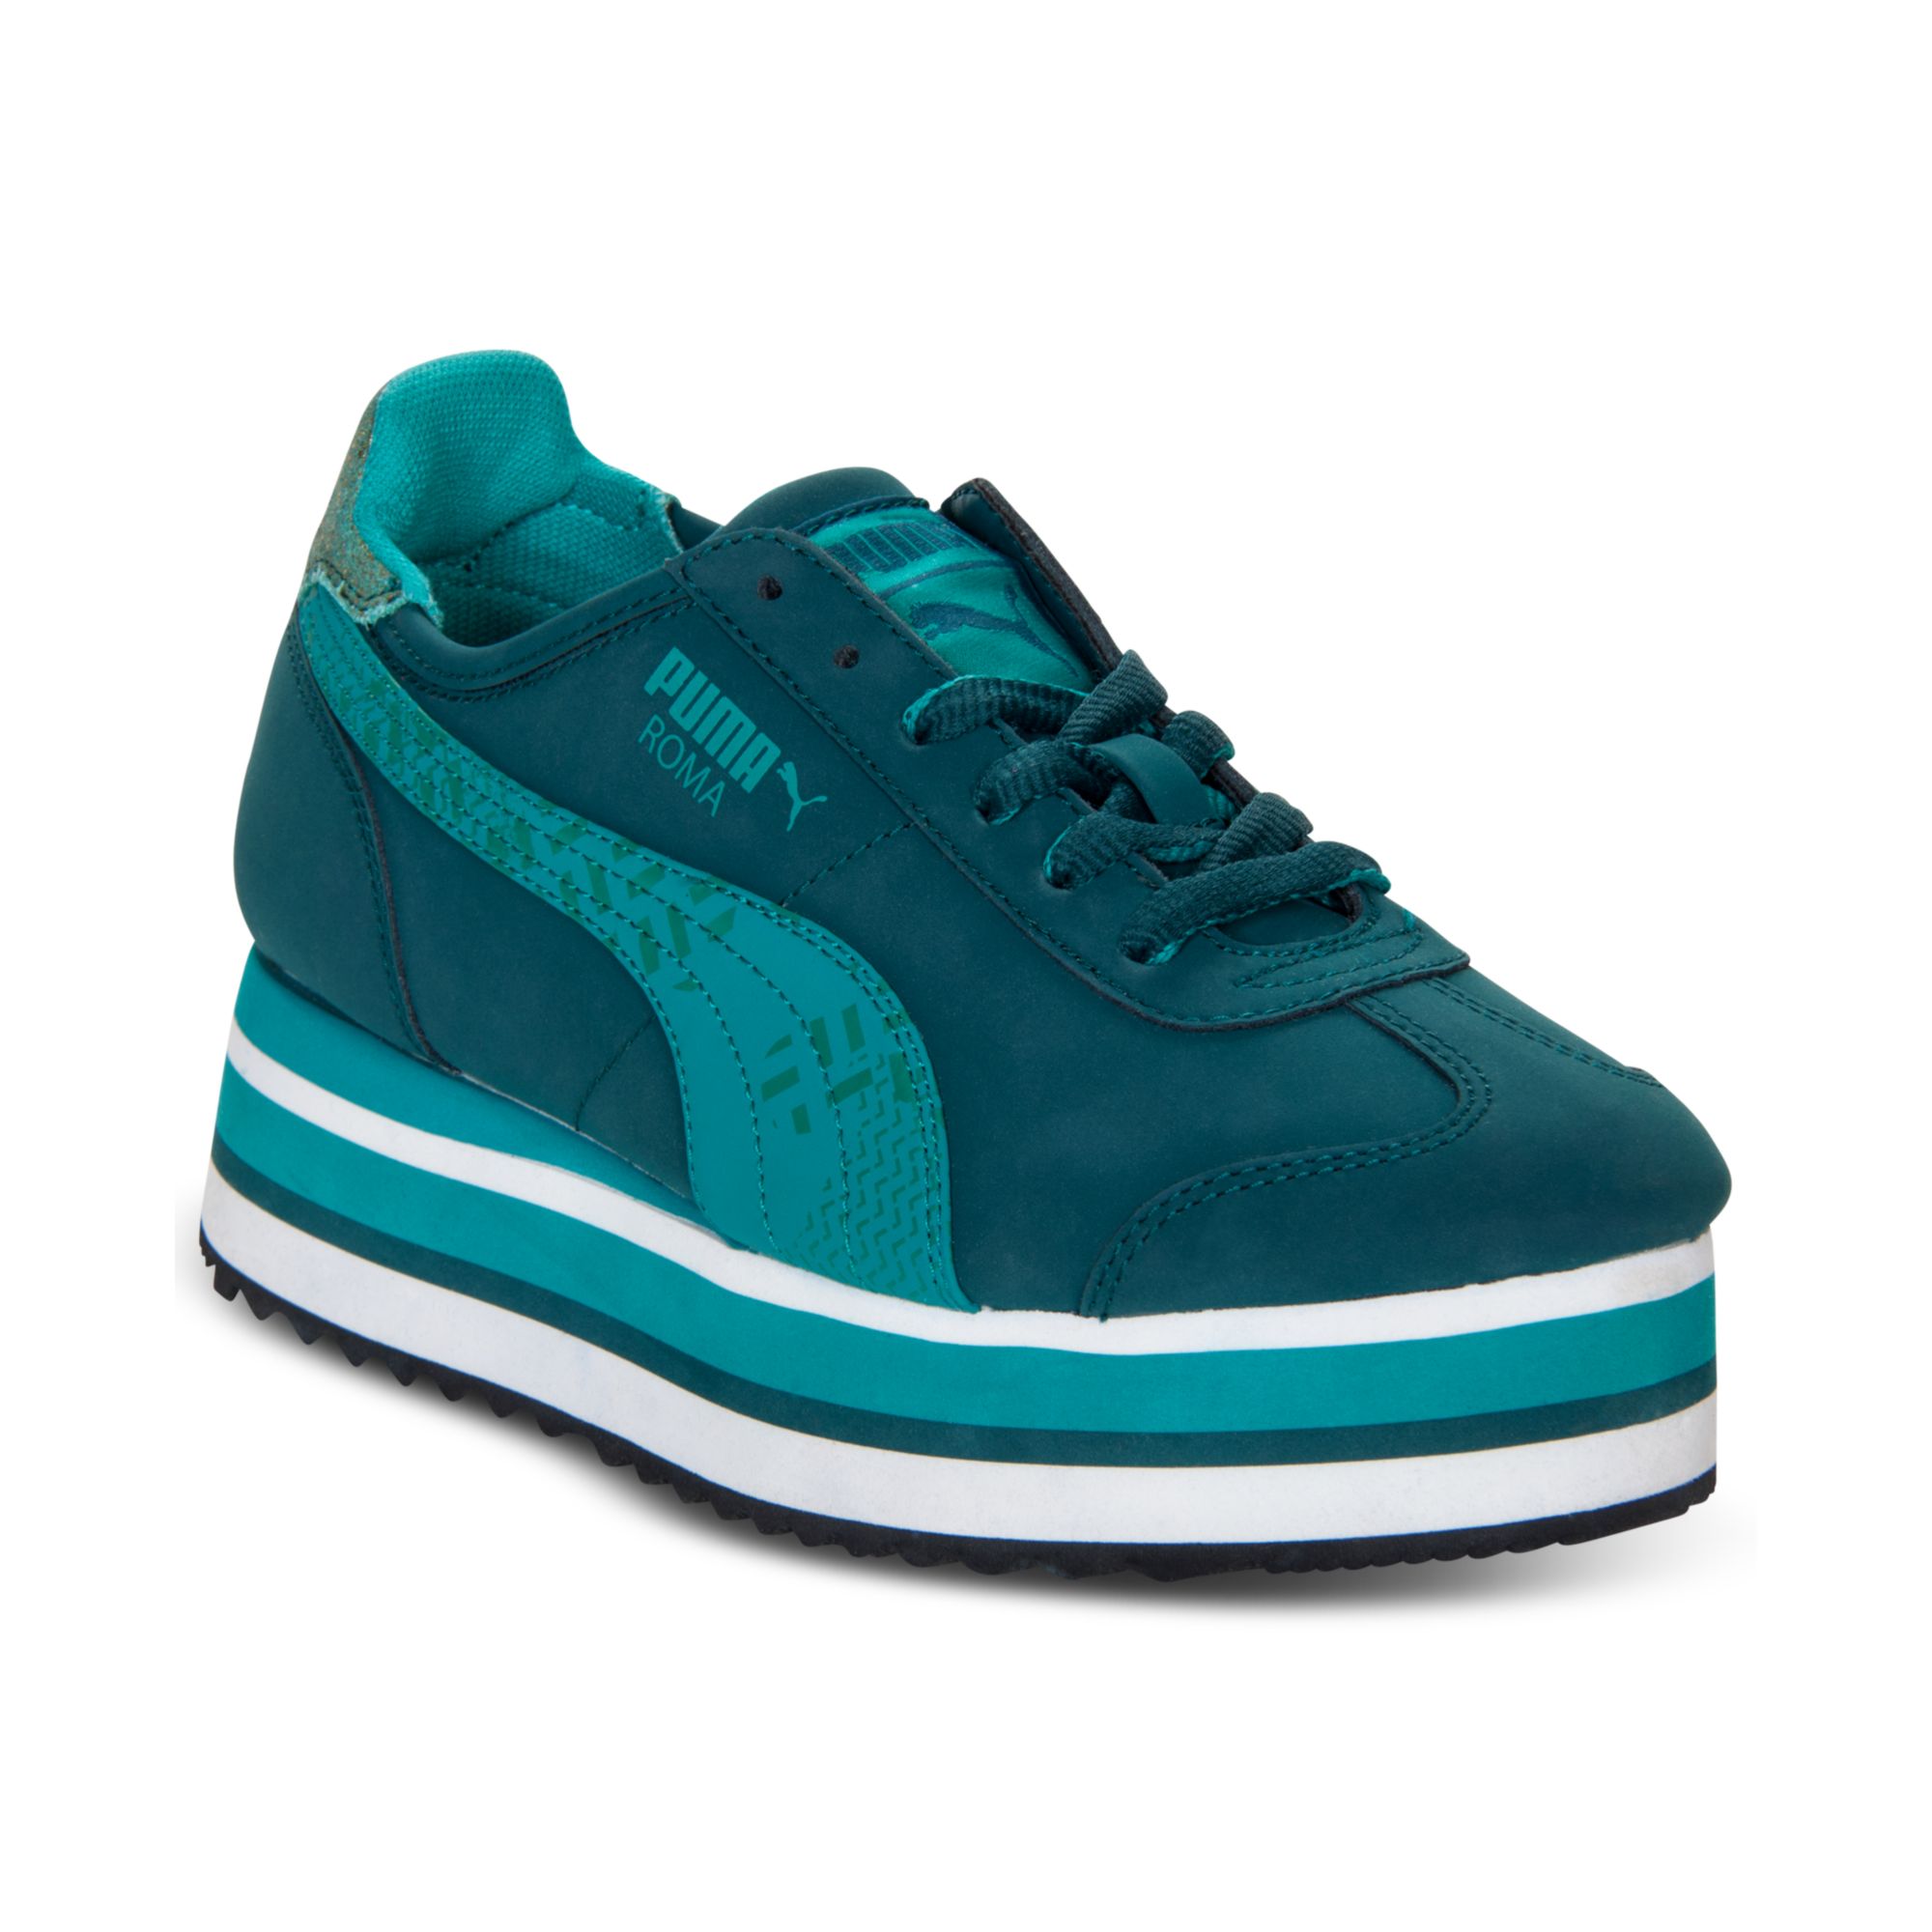 Lyst - Puma Roma Slim Stacked Casual Sneakers in Green